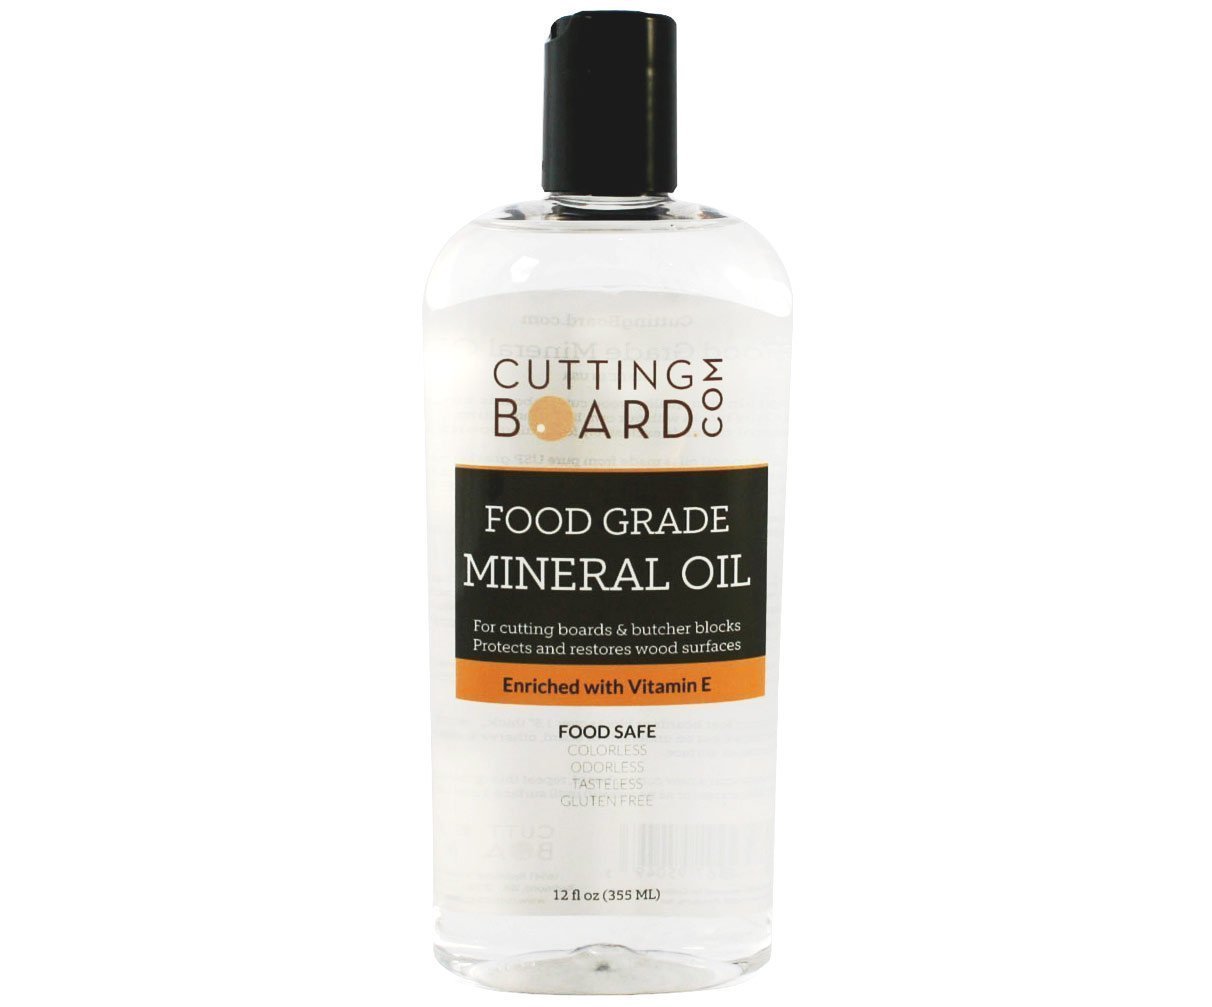 Food Grade Mineral Oil for Cutting Boards, USA